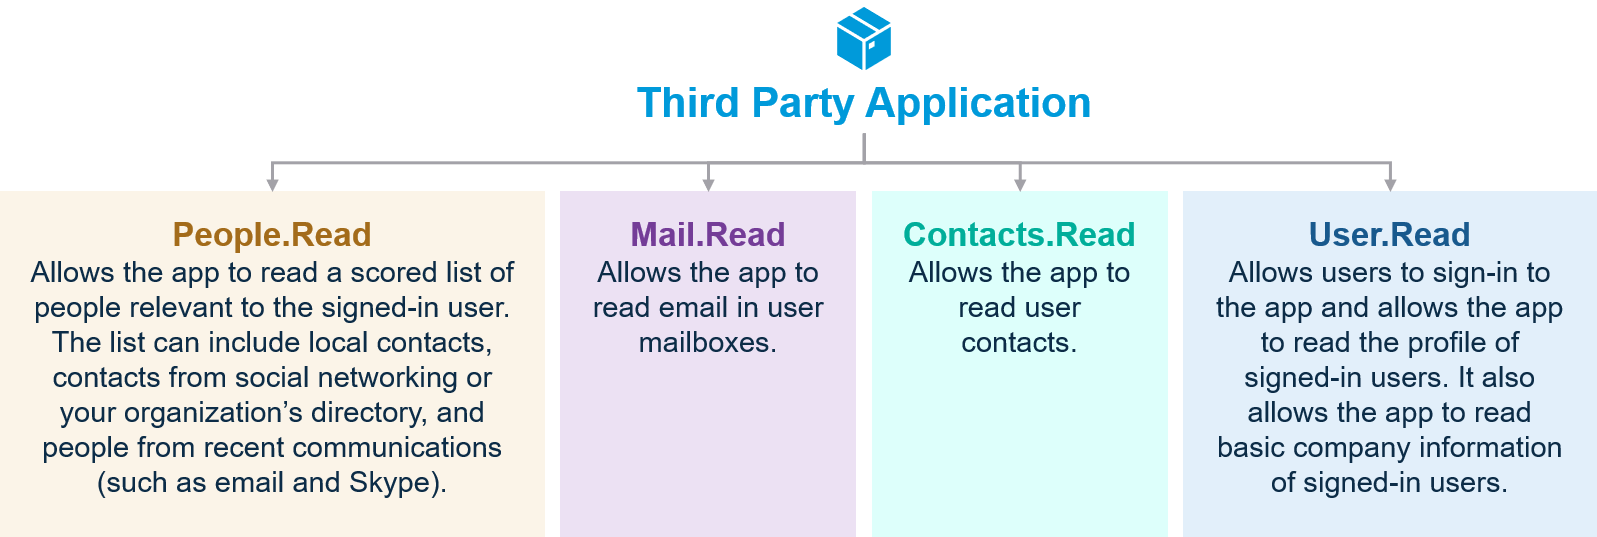 Third Party Application 